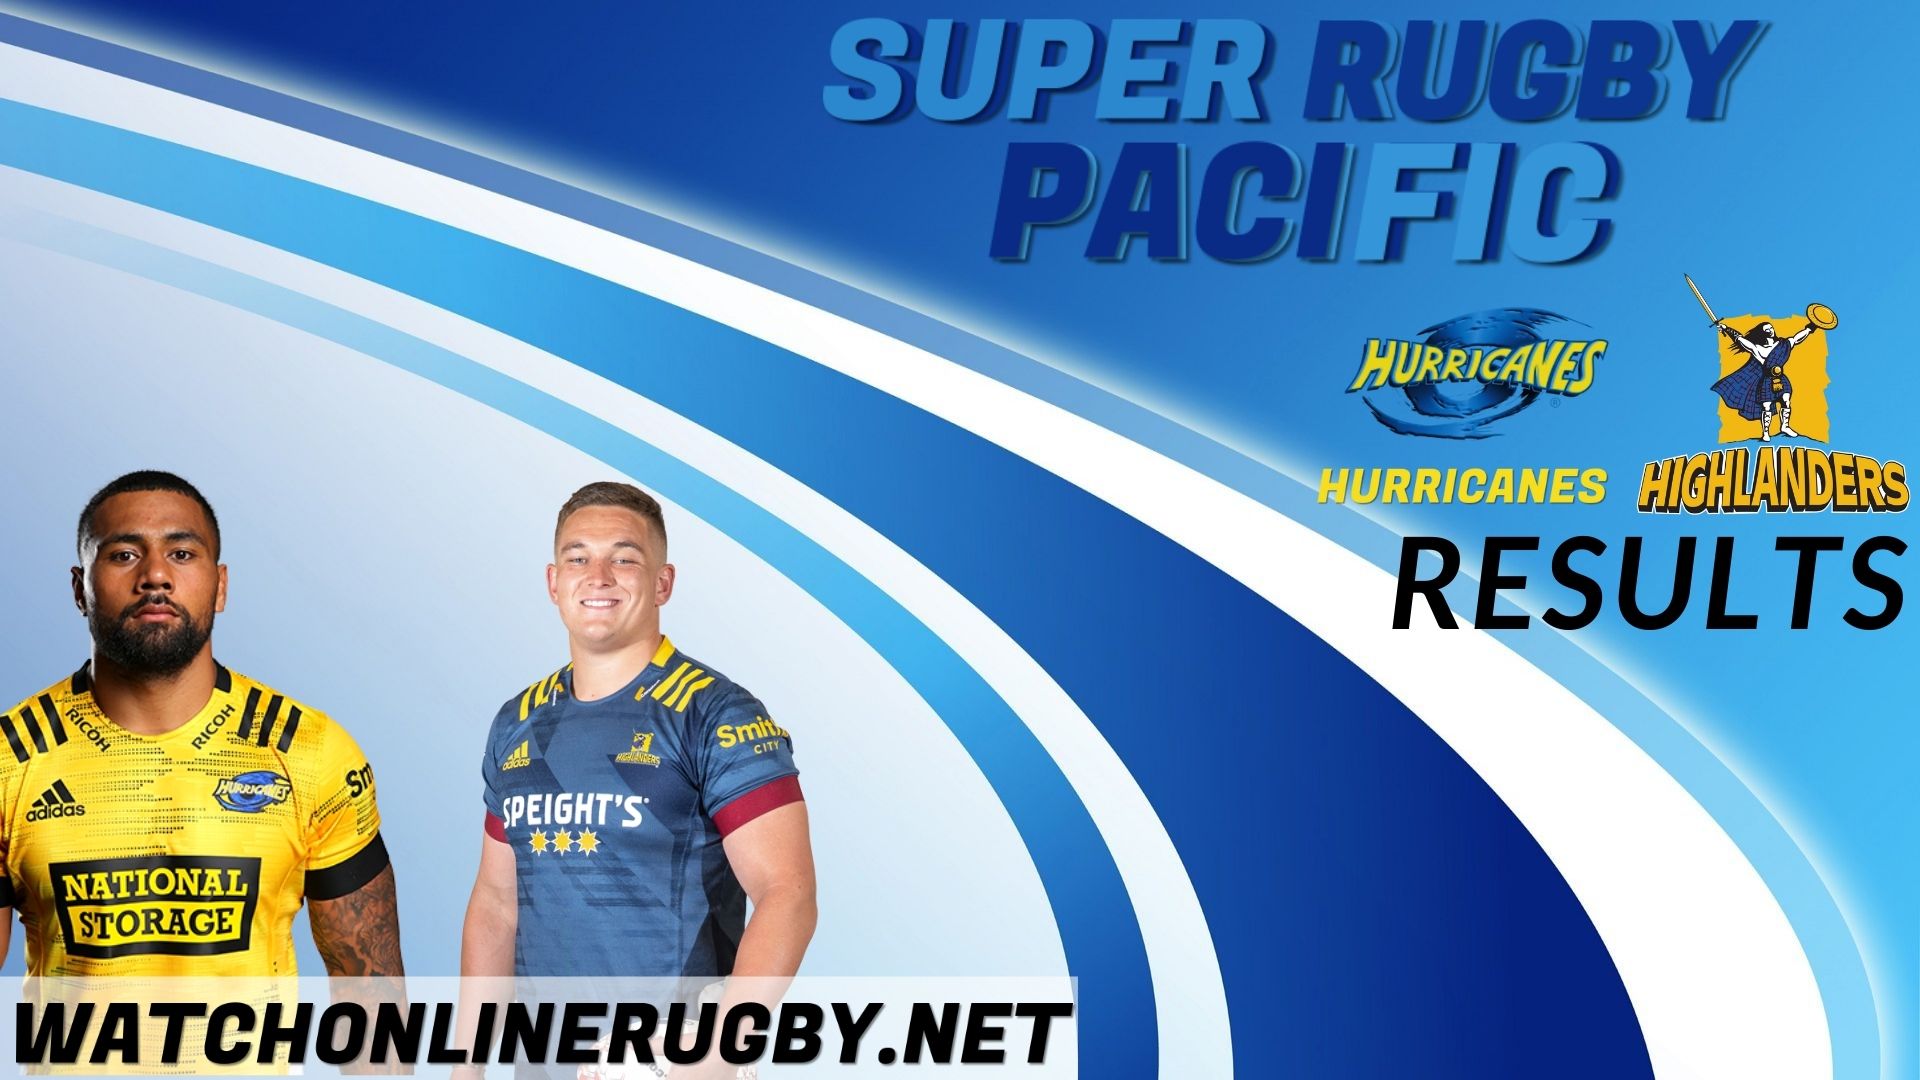 Hurricanes Vs Highlanders Super Rugby Pacific 2022 RD 3